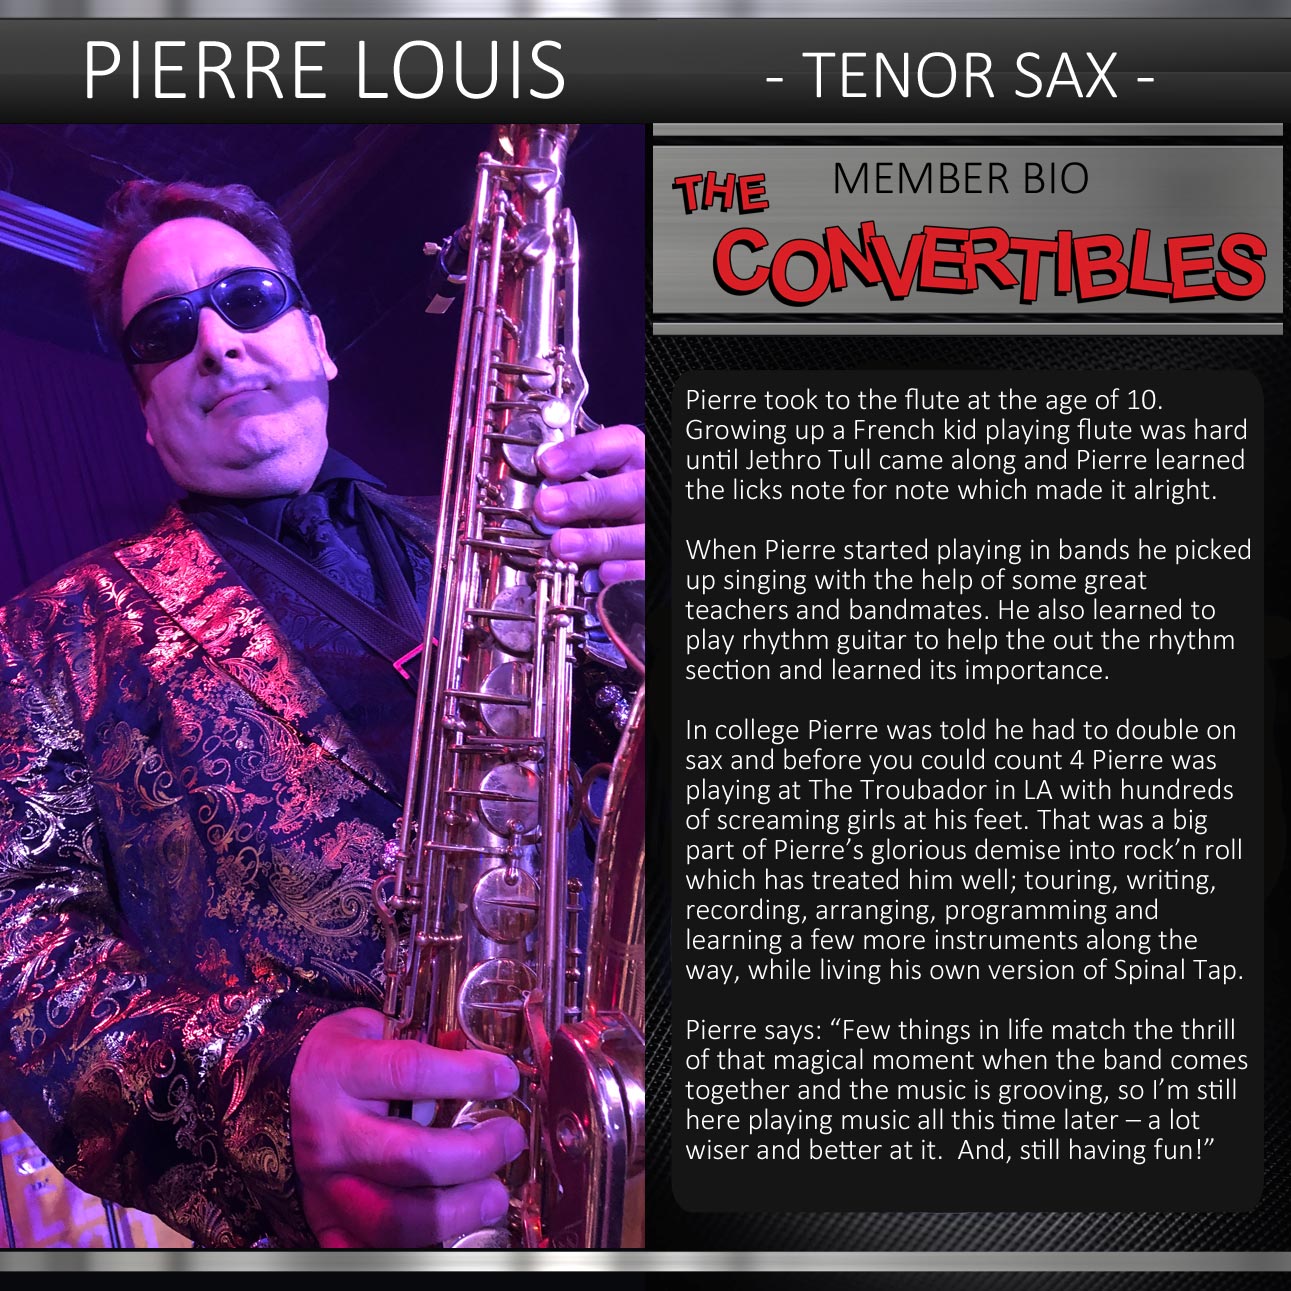 Pierre Louis - one of the hottest & most soulful saxophonists in LA, playing music that mixes funky rhythms with a rock feel.